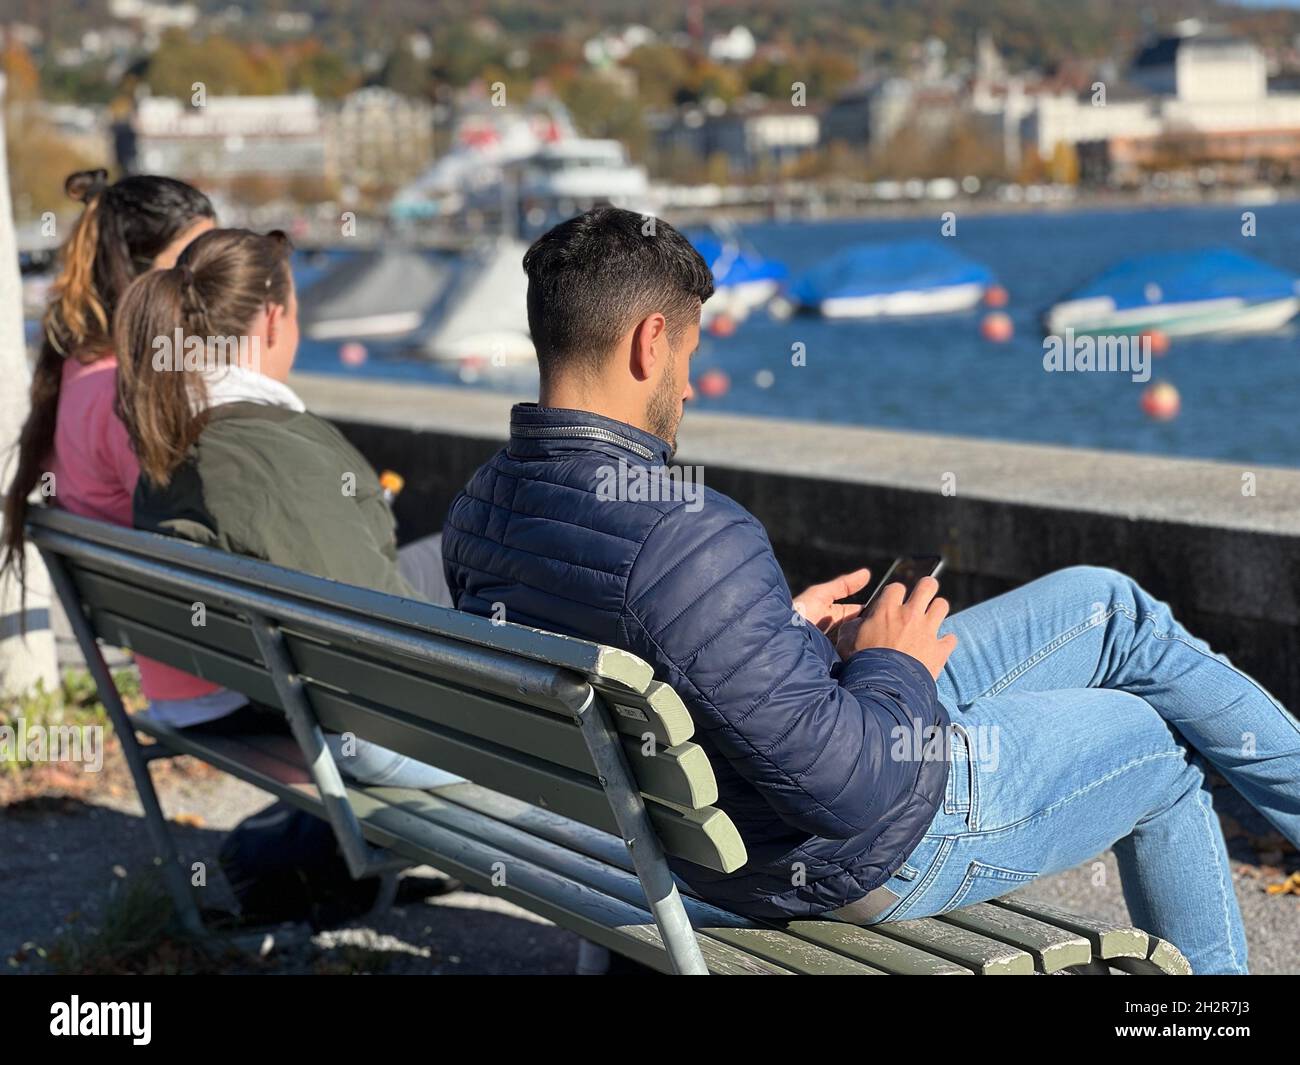 Two women and one man sit on wooden bench and keep social distancing.  They sit on opposite ends of bench and each of them look into their cell phones Stock Photo